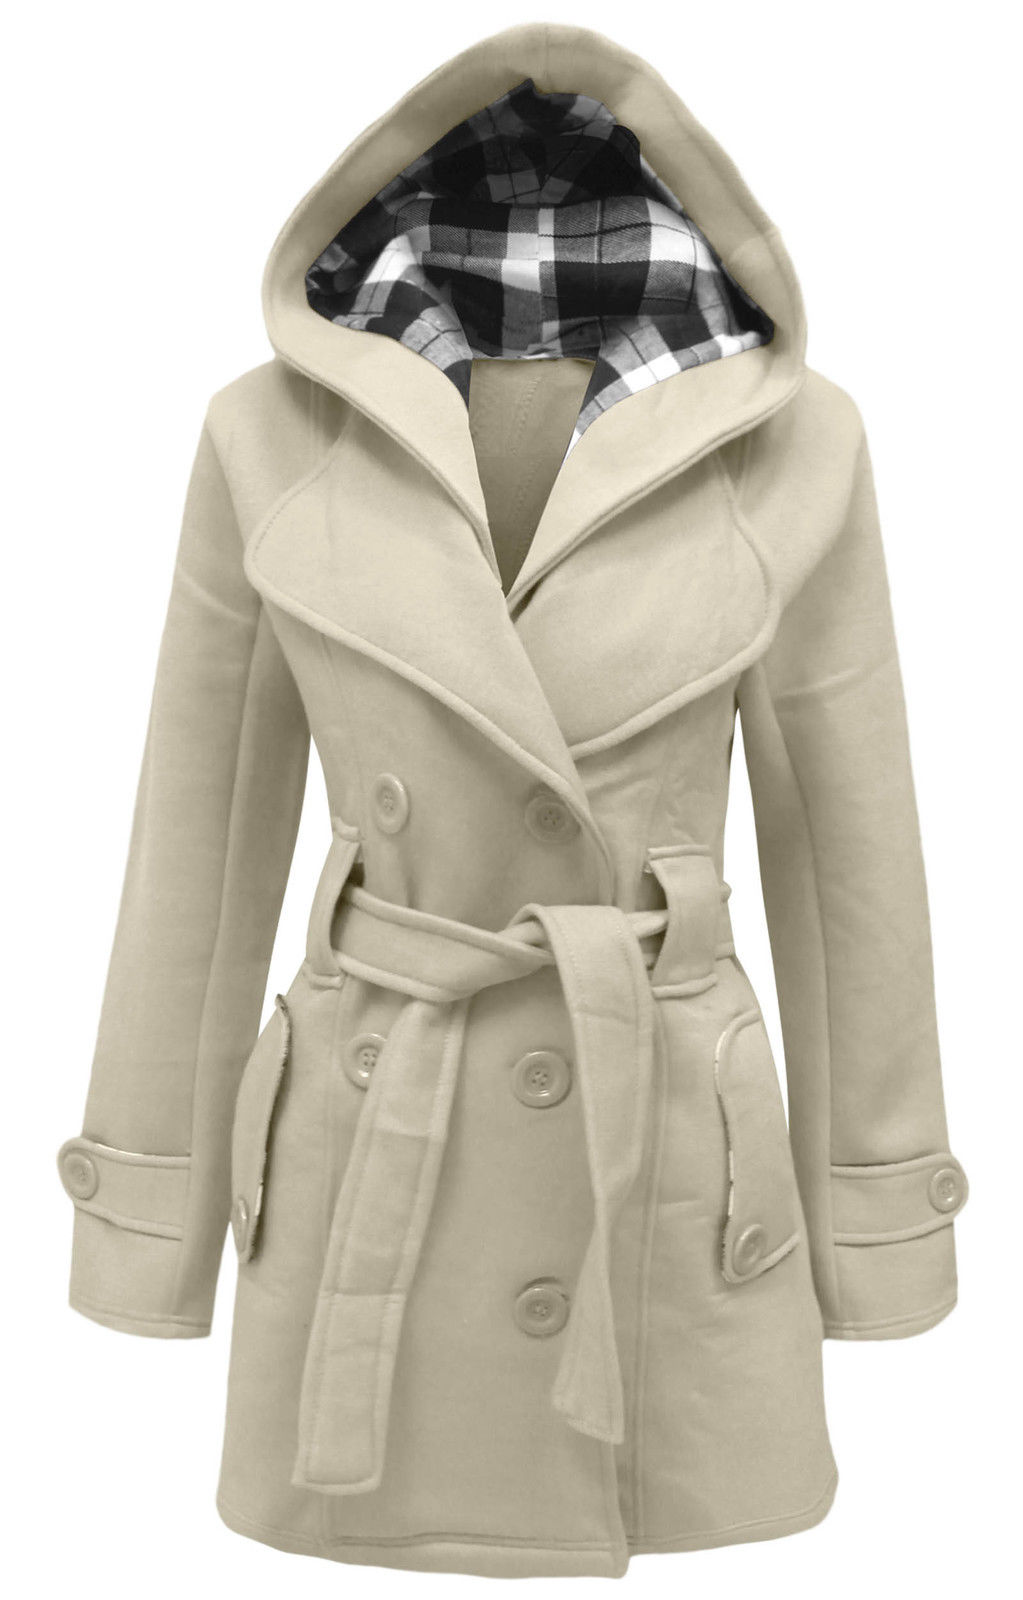 Cozy & Colorful Winter Coats - The Style Basket